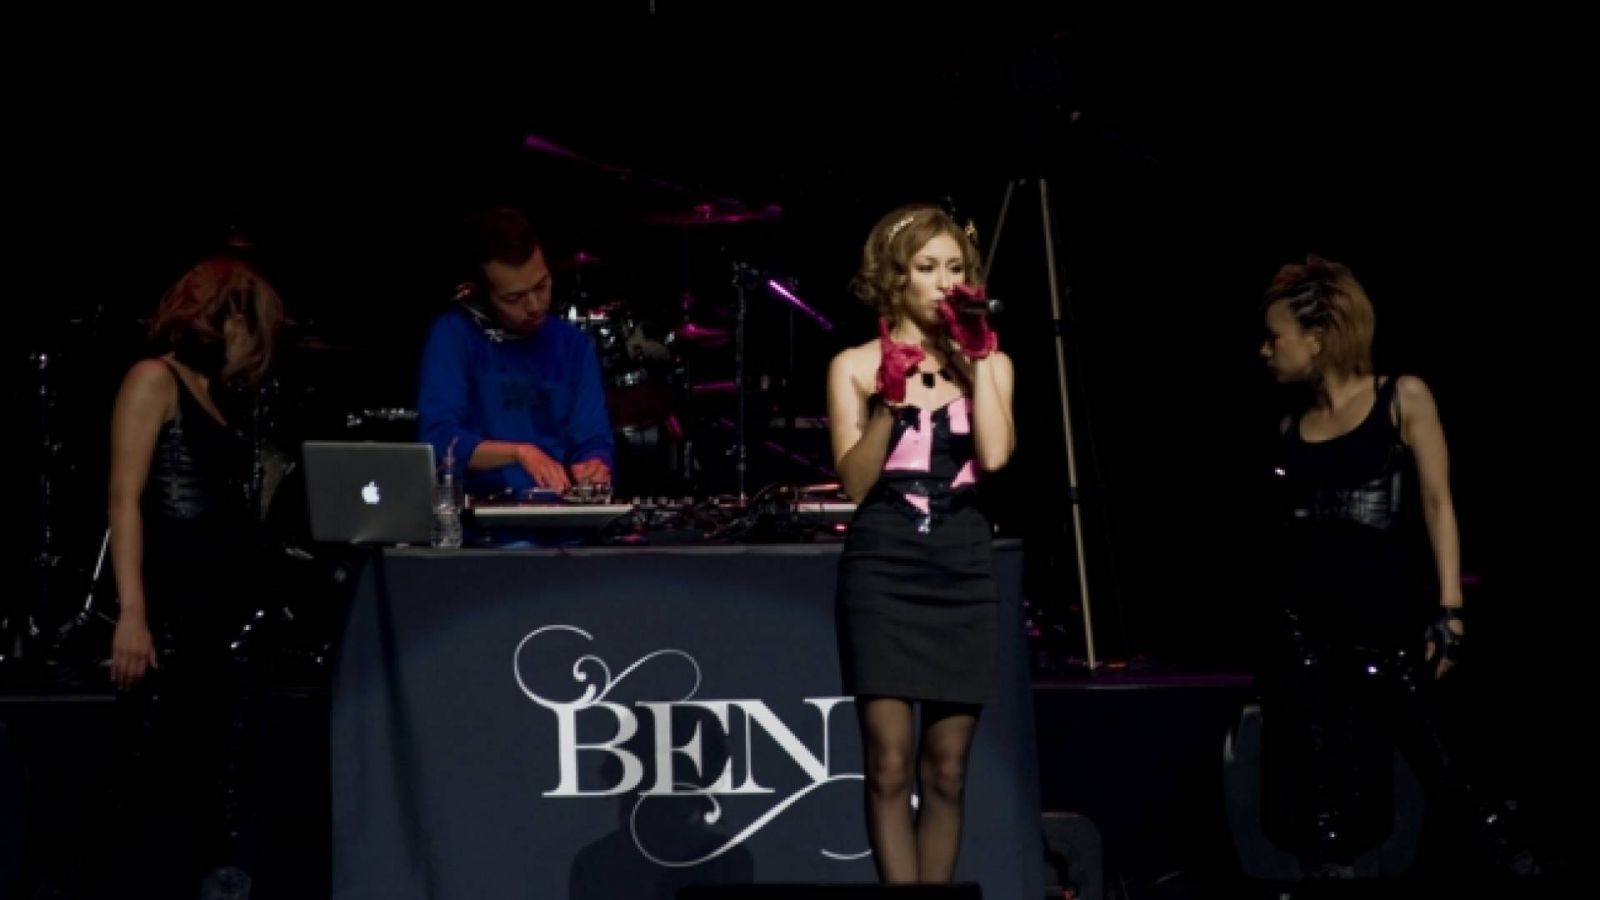 BENI at Anime Expo - Live and Panel Report © BENI - Valerie Durham